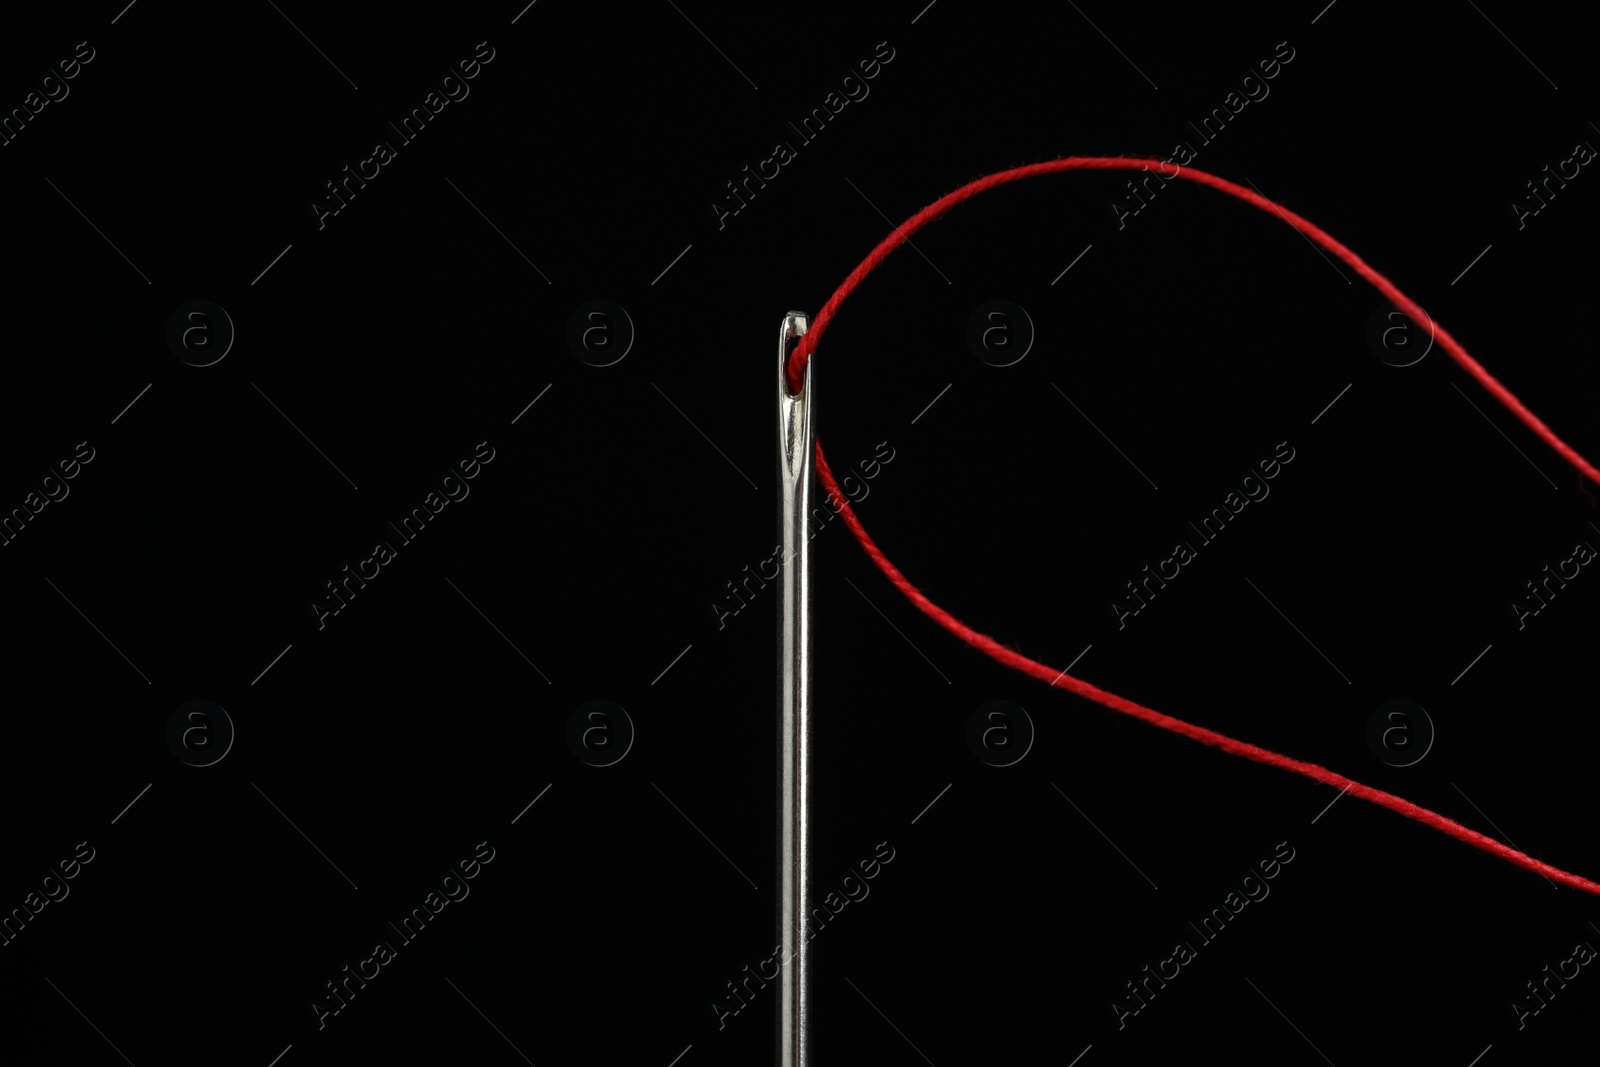 Photo of Sewing needle with red thread on black background, closeup